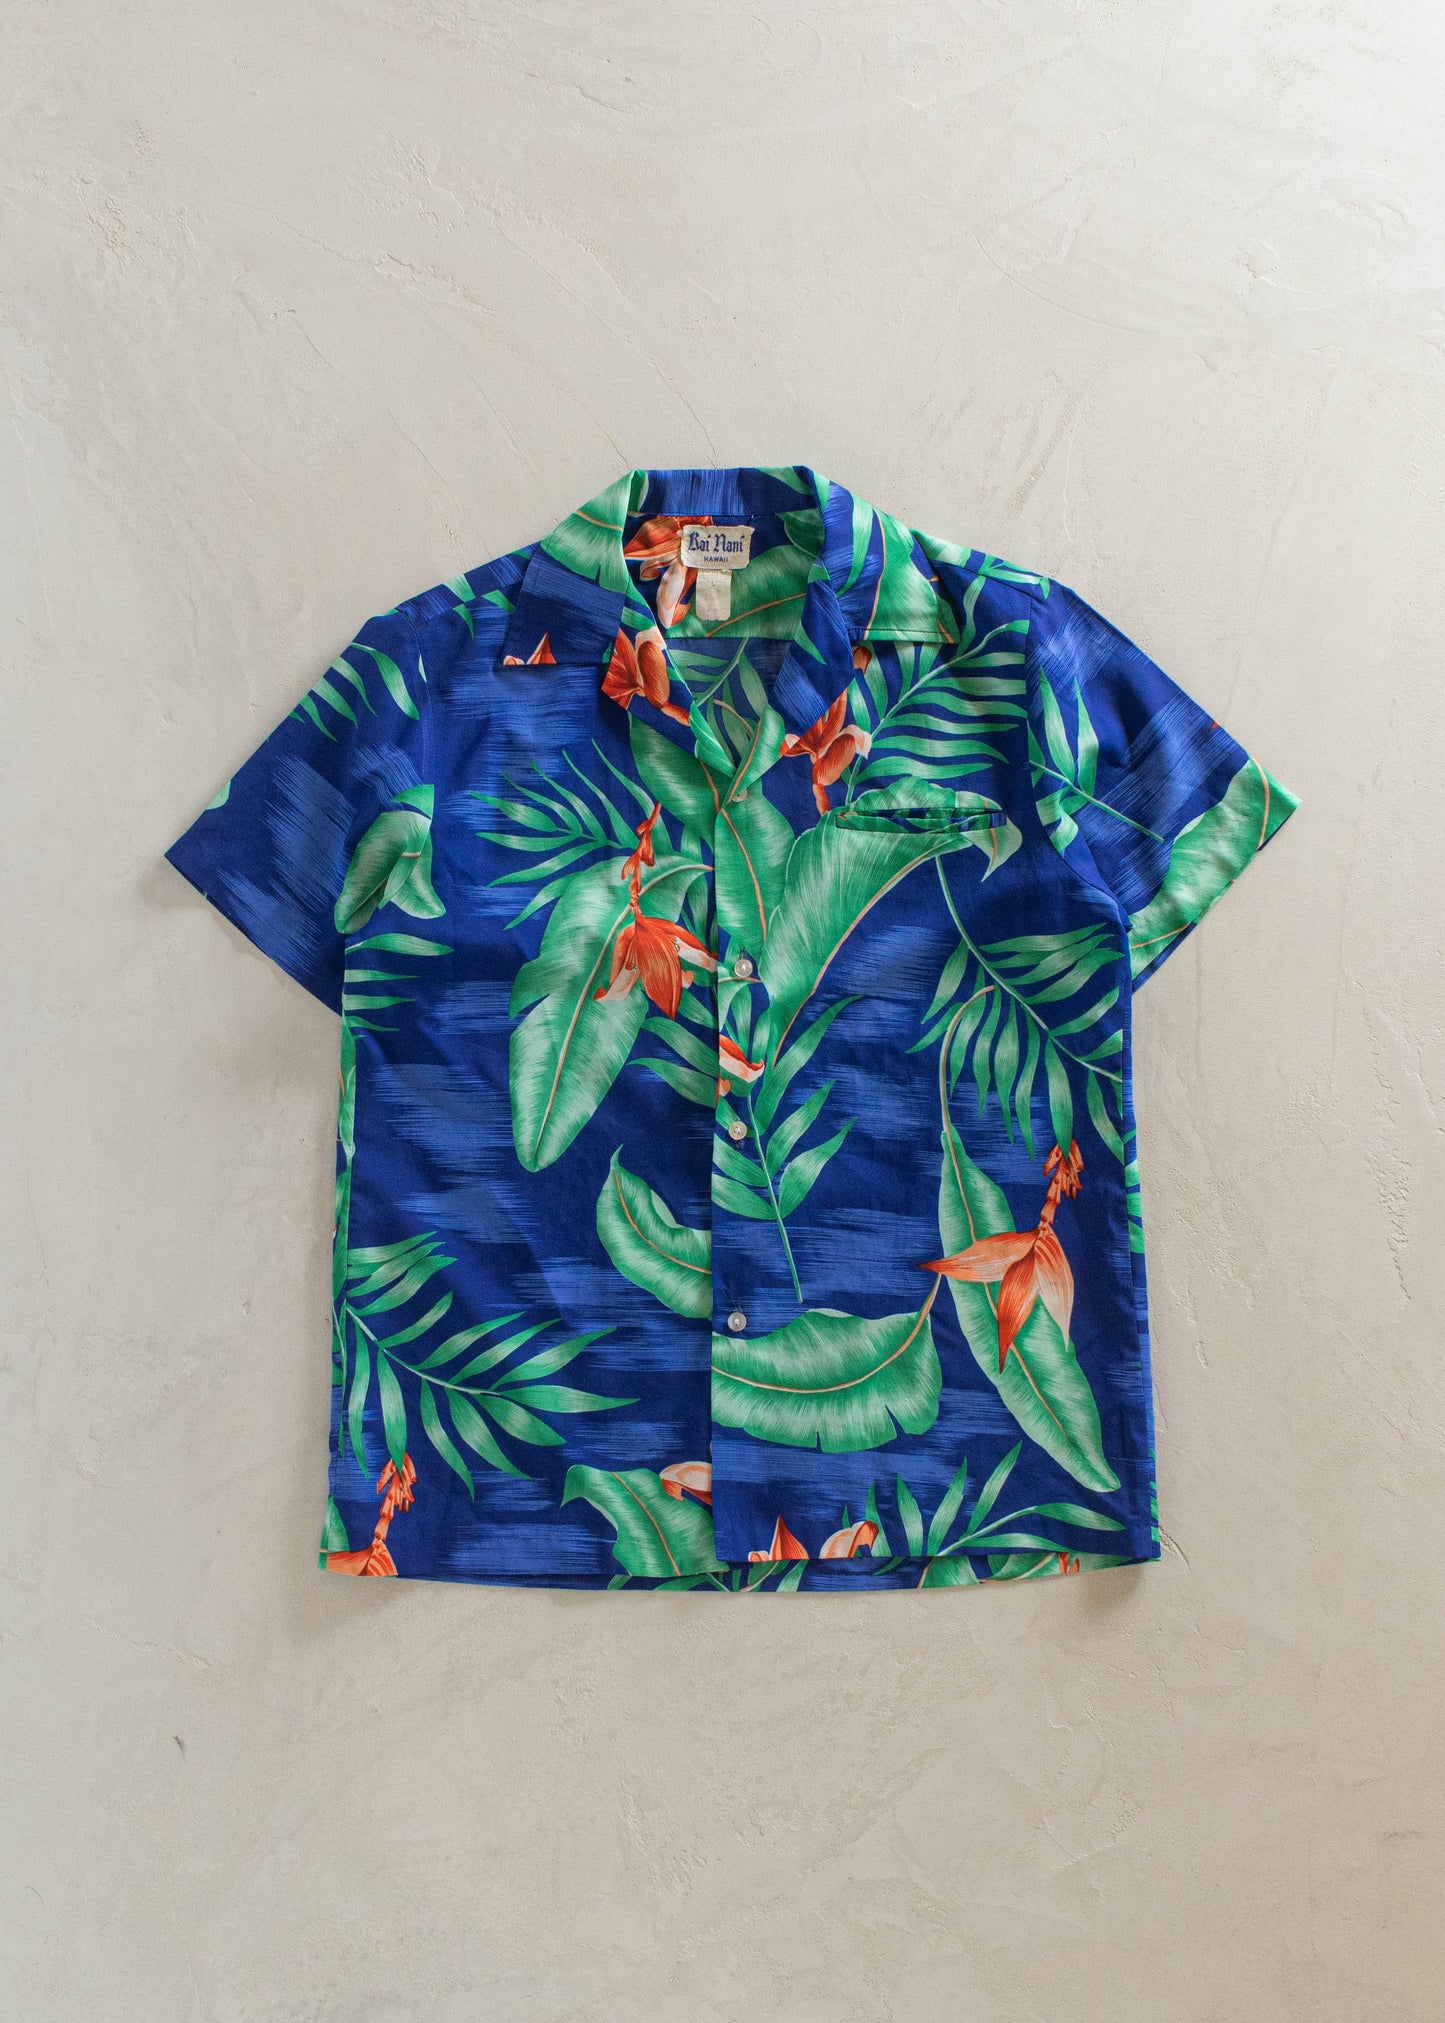 1980s Tropical Pattern Short Sleeve Button Up Shirt Size S/M